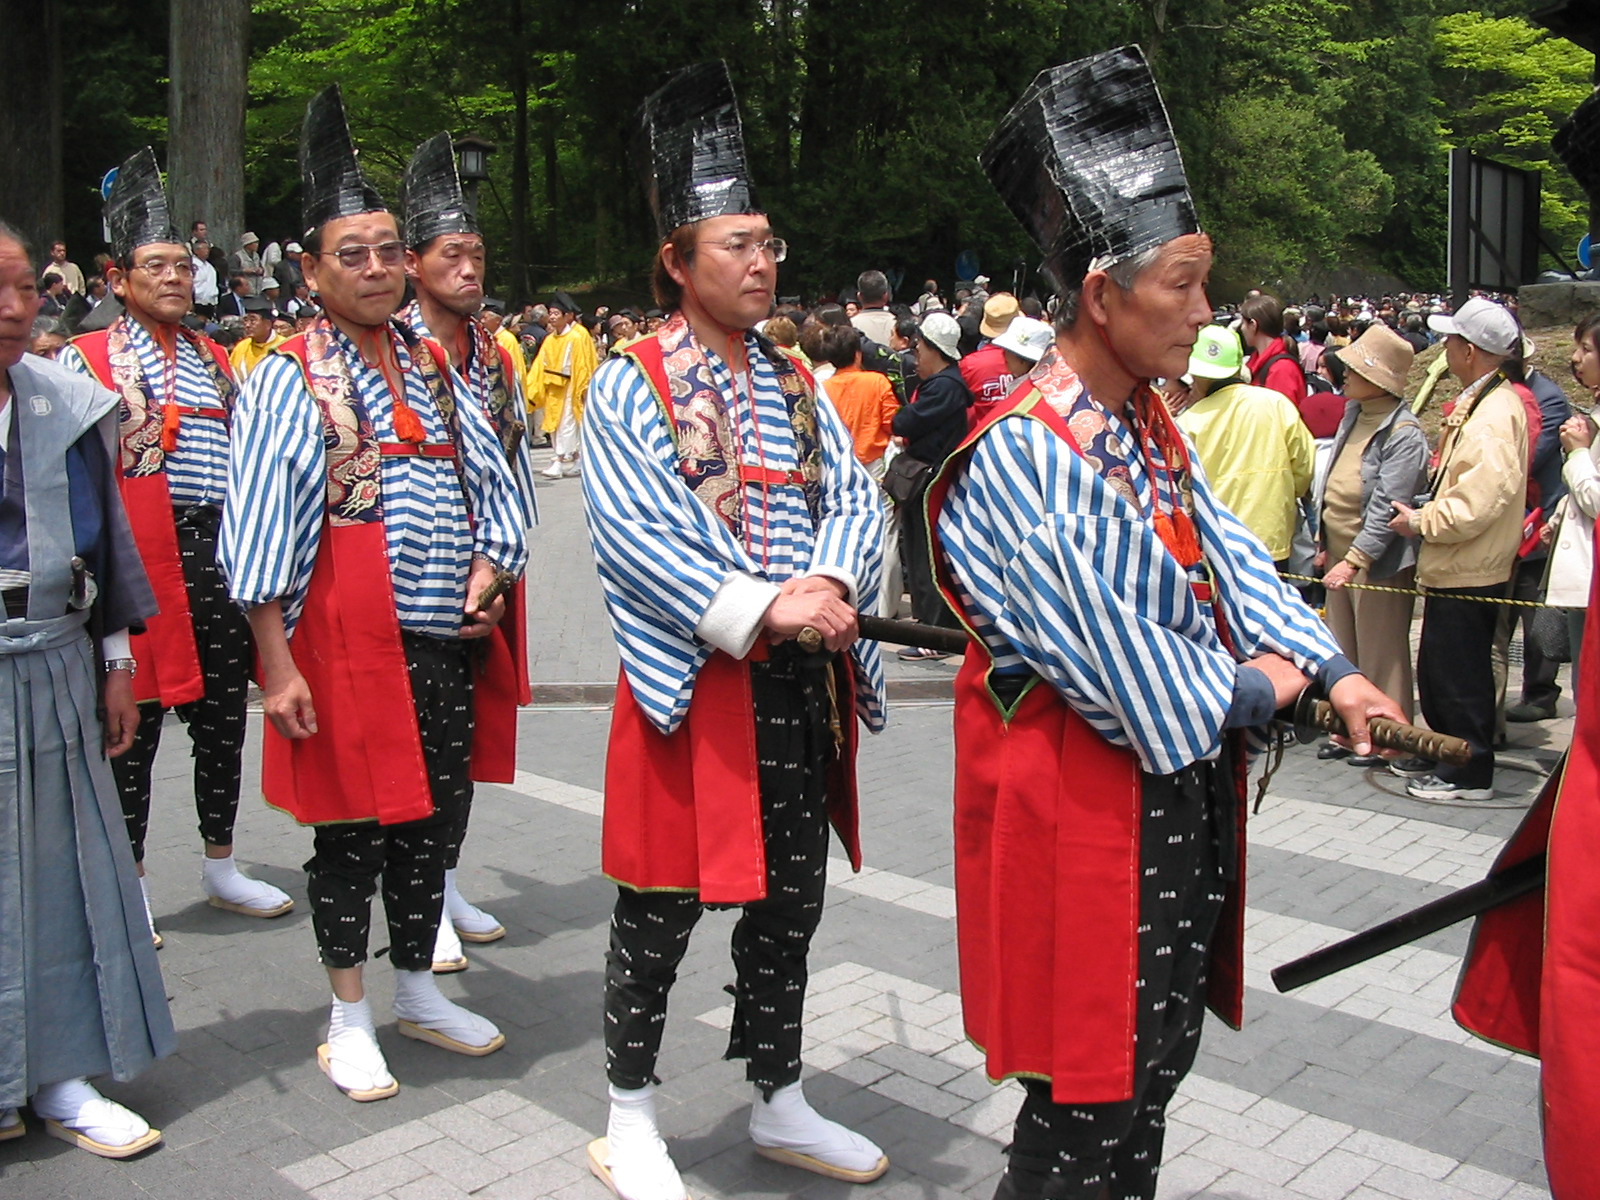 men in tradtional garb and tall black hats